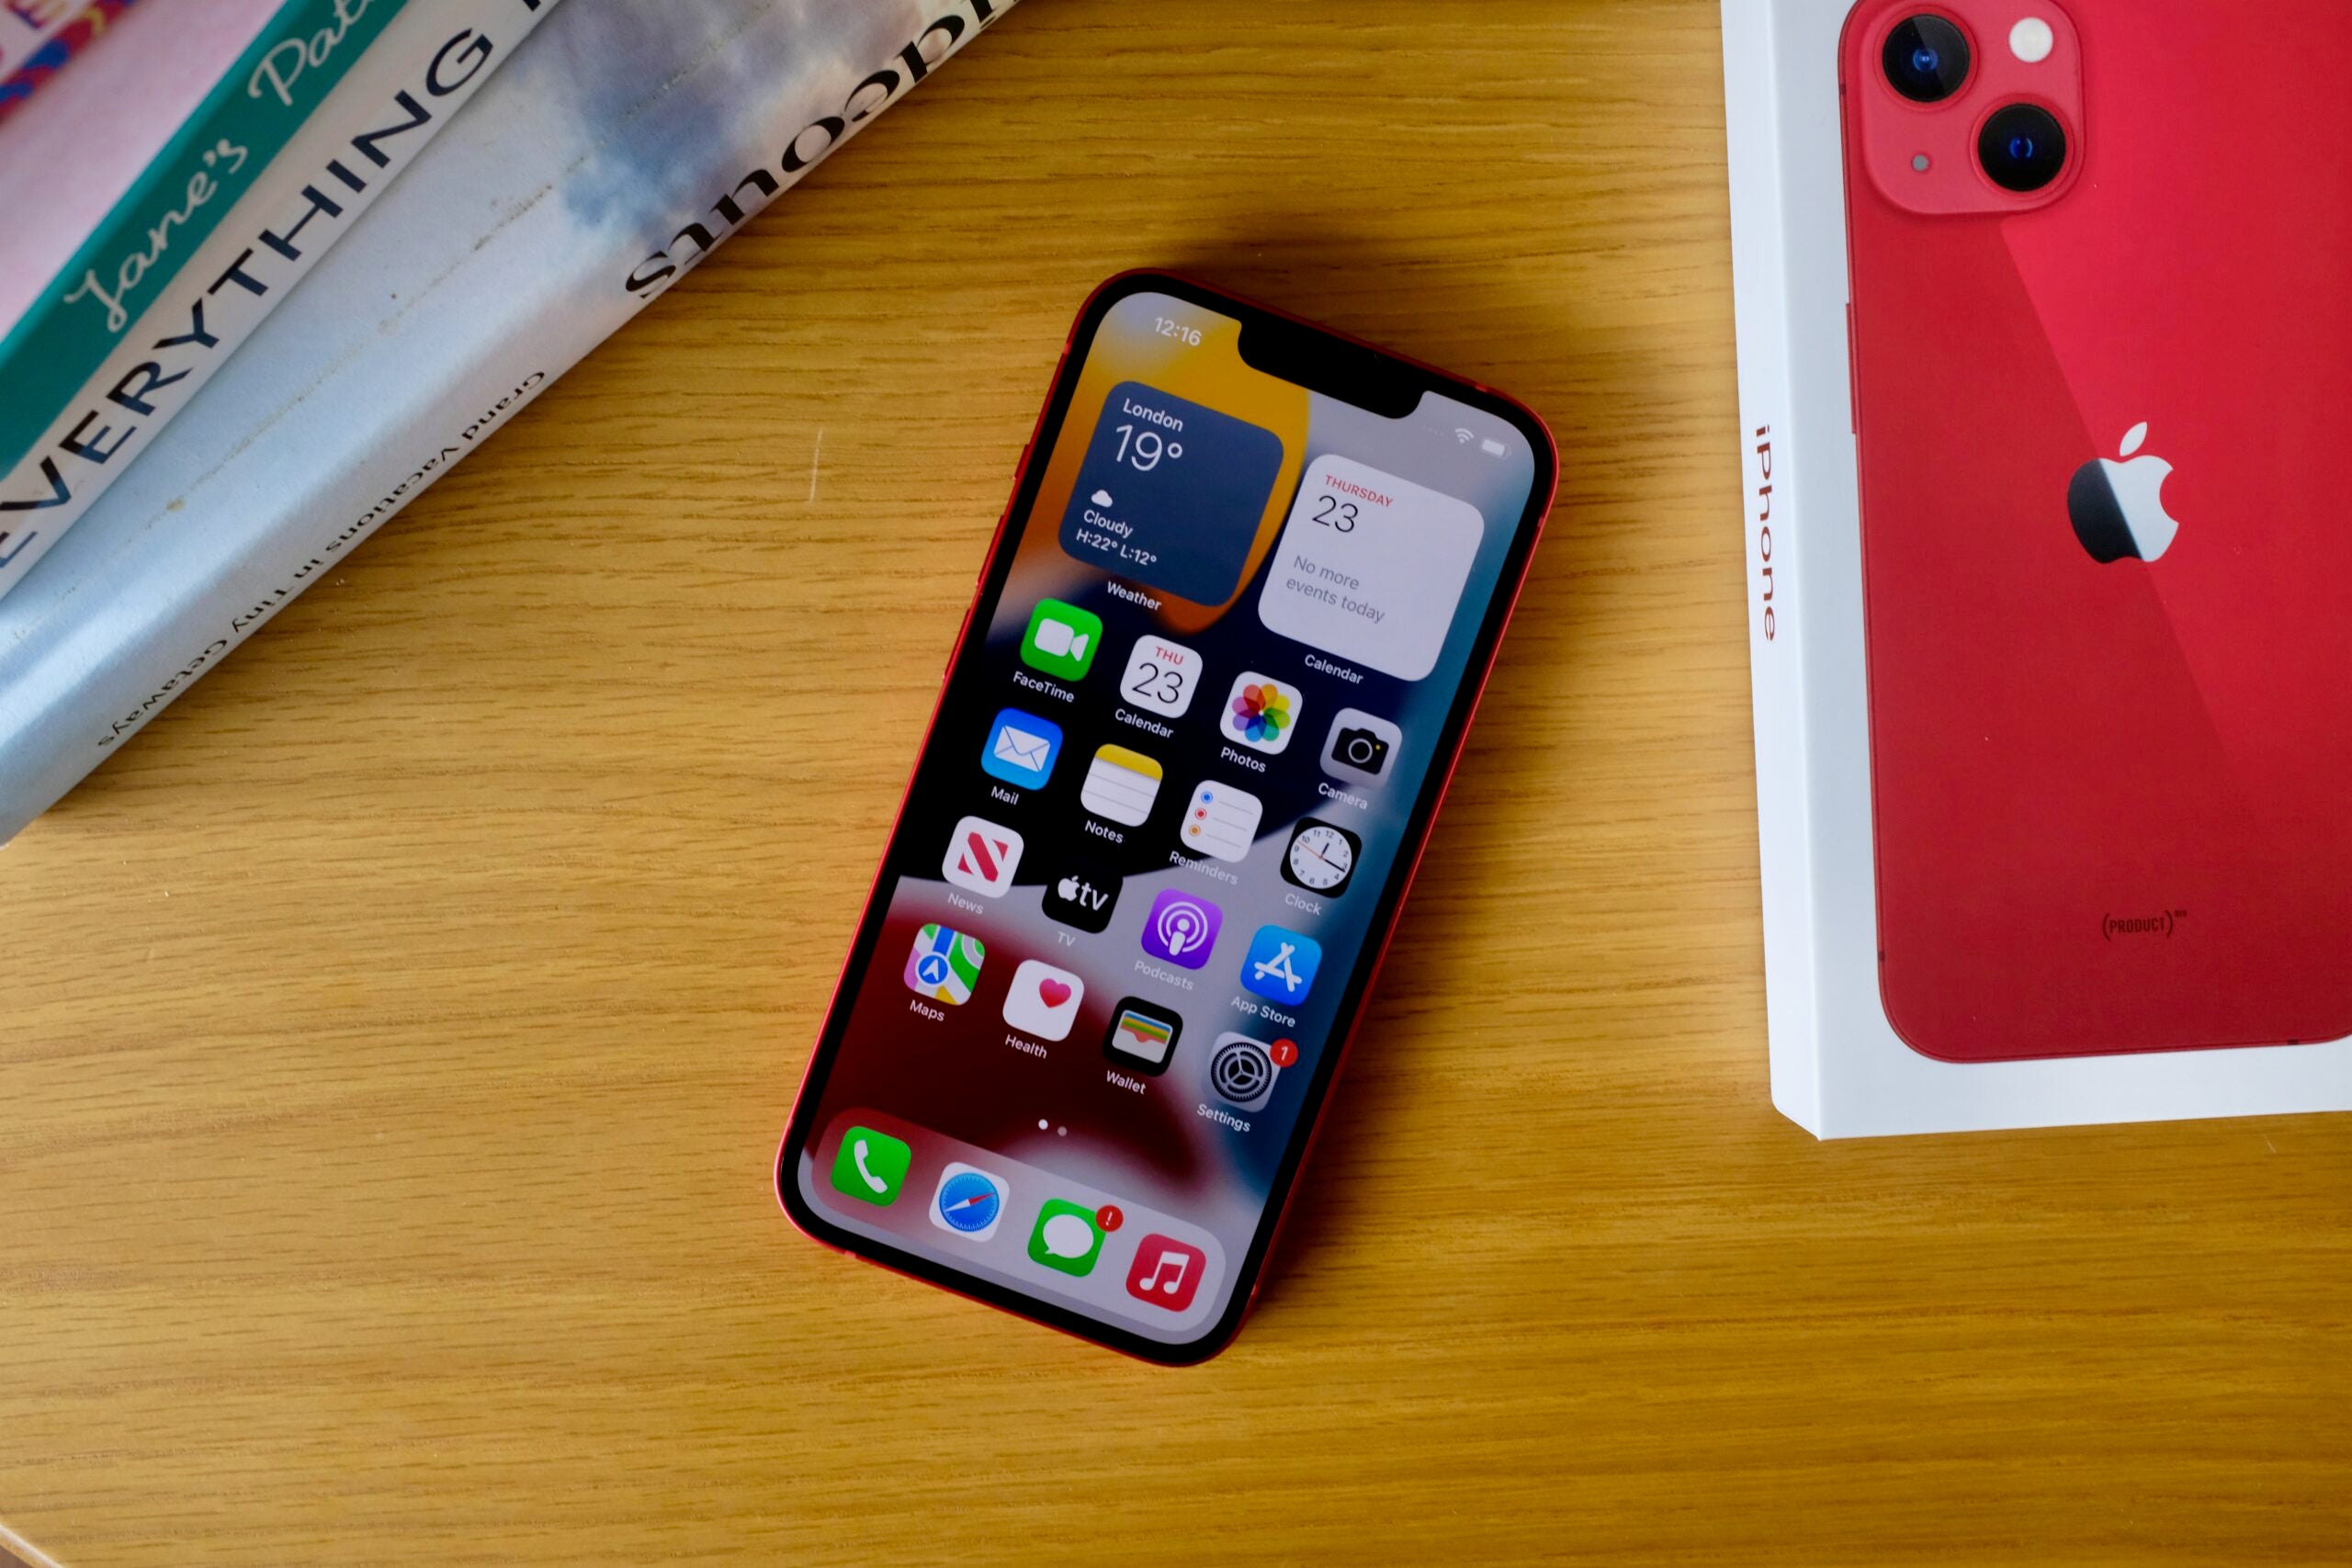 7 major issues of iOS 15 Update that iPhone users are complaining about